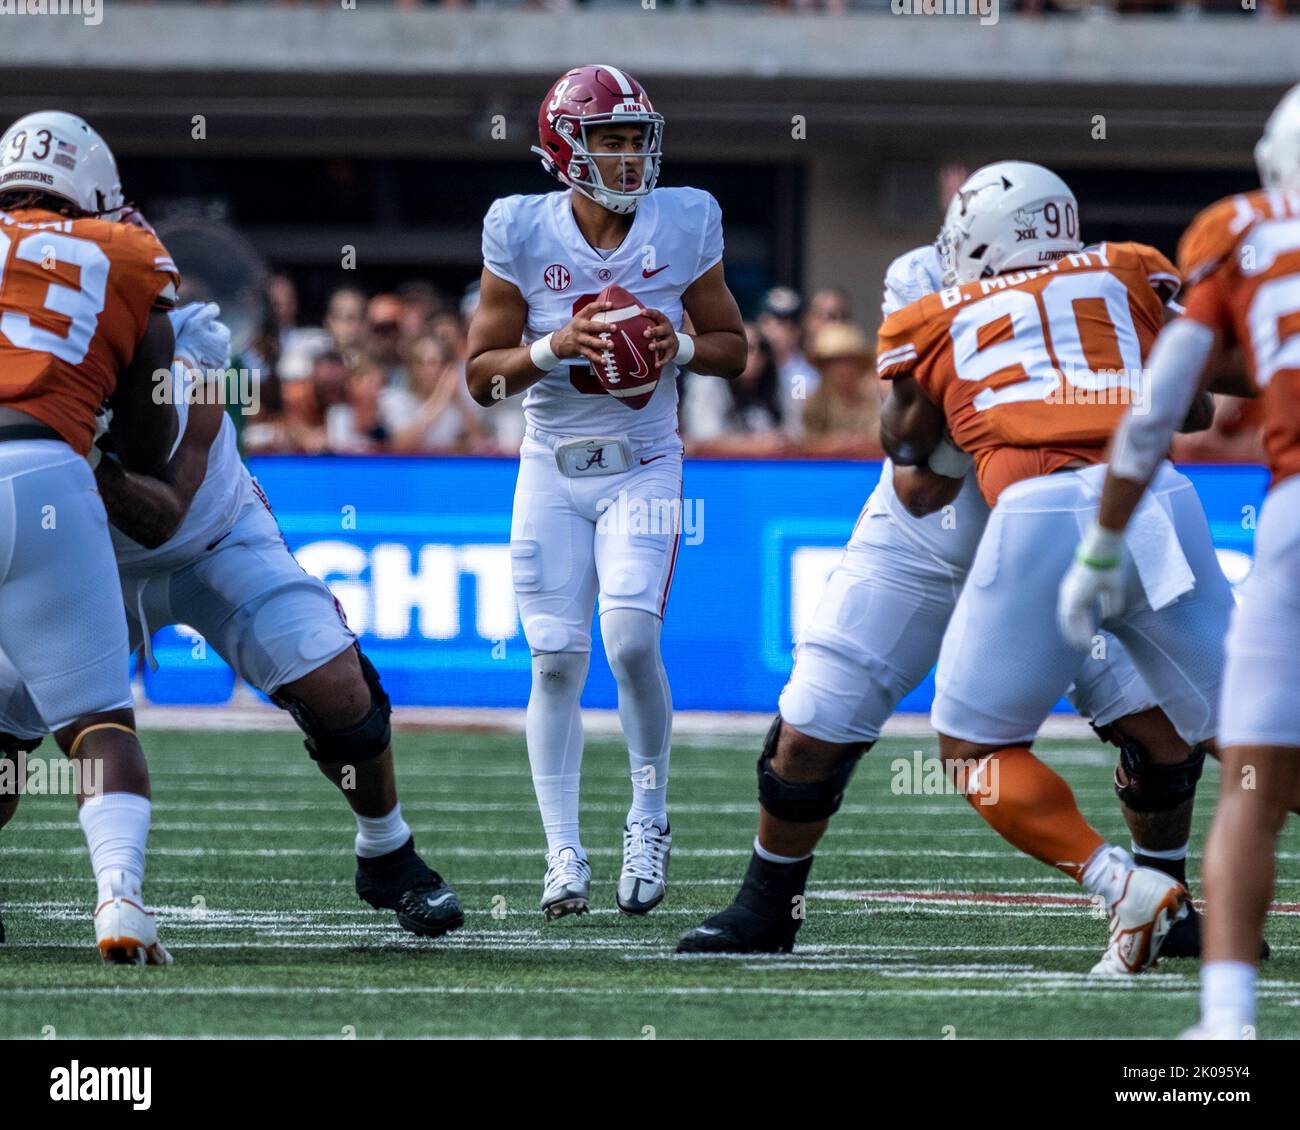 September 10, 2022. Bryce Young #9 of the Alabama Crimson Tide in action vs the Texas Longhorns at DKR-Memorial Stadium. Texas and Alabama are tied 10-10 at the half. Stock Photo